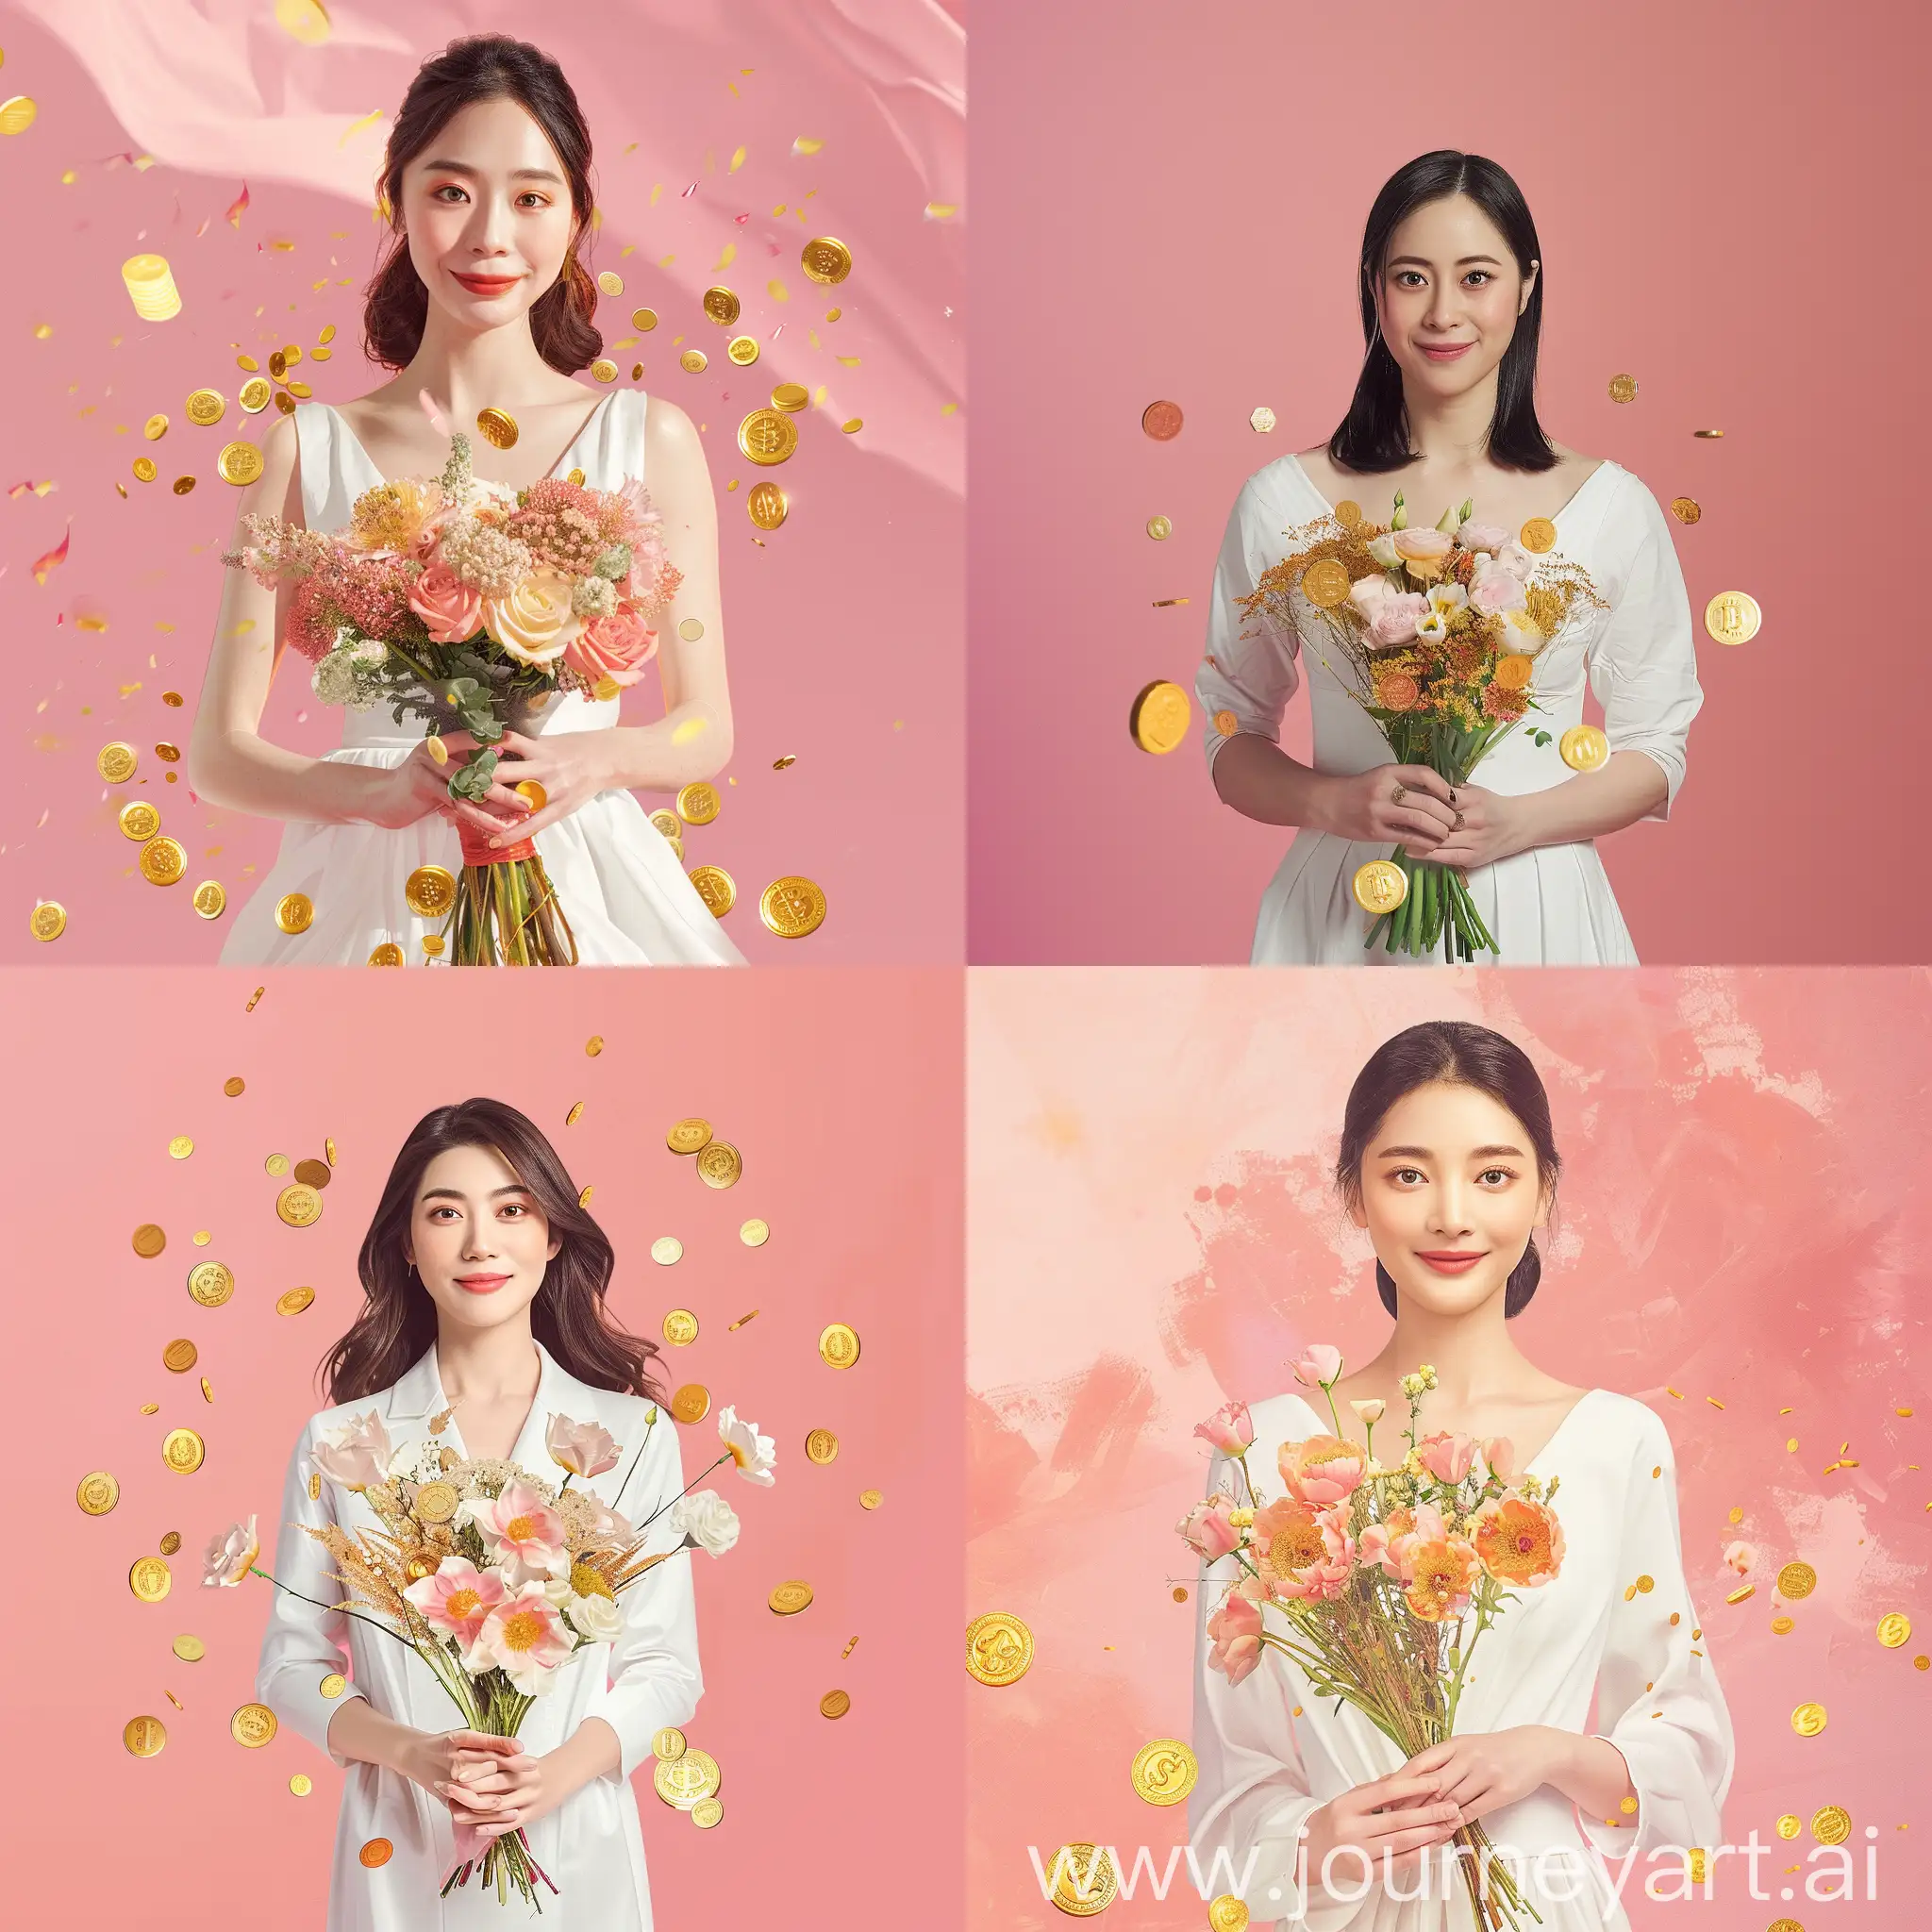 Smiling-Asian-Woman-in-White-Dress-with-Bouquet-of-Gold-Coins-on-Pink-Background